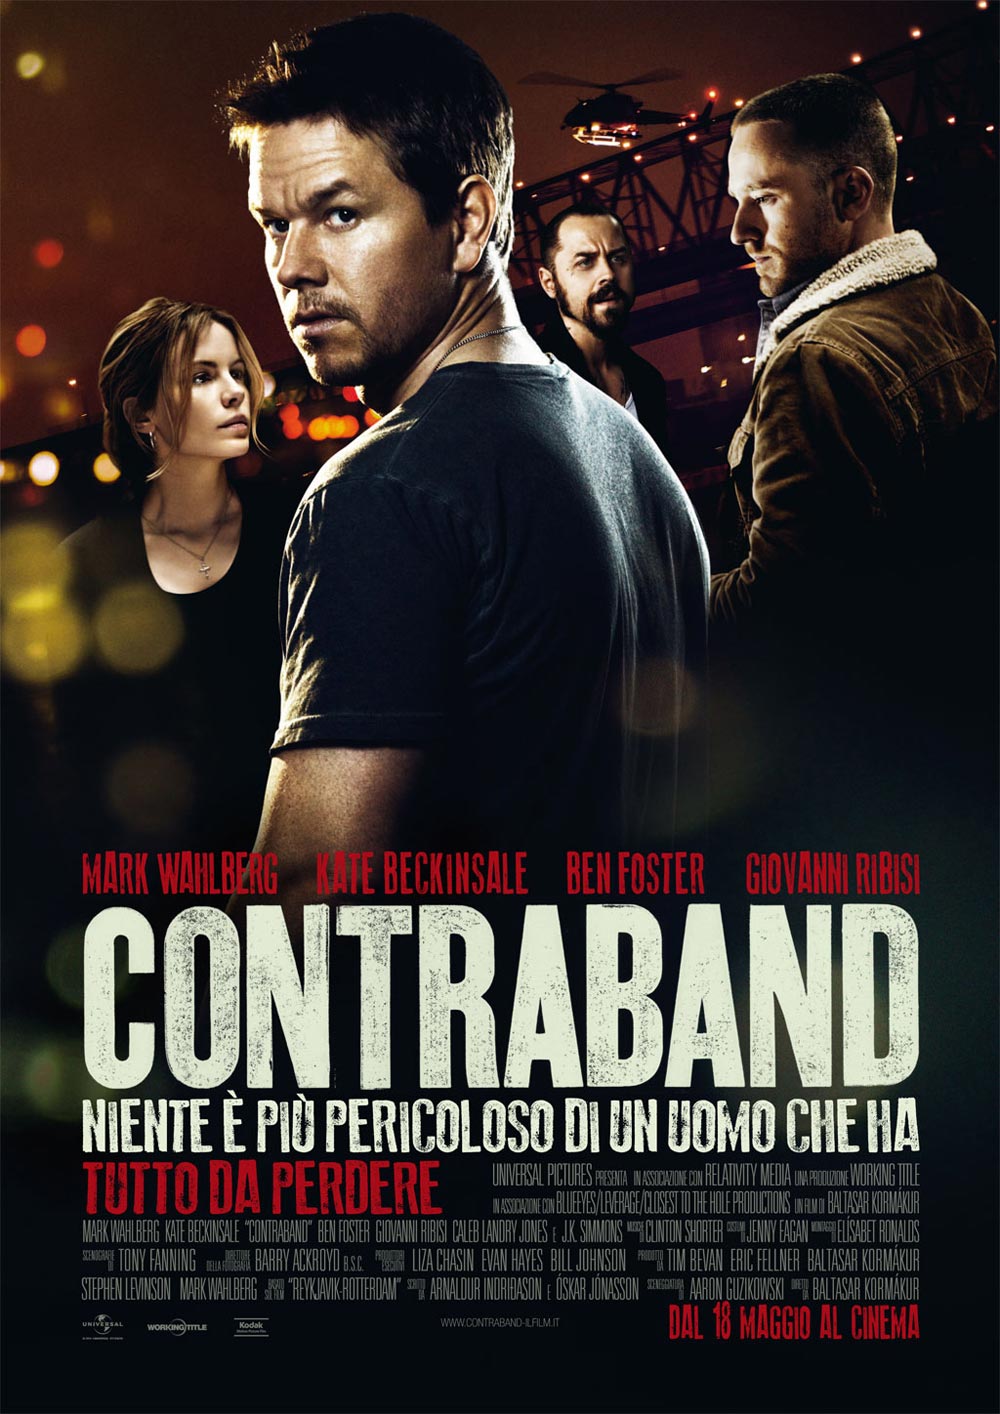 CONTRABAND is directed by Baltasar Kormákur and comes to theaters ...